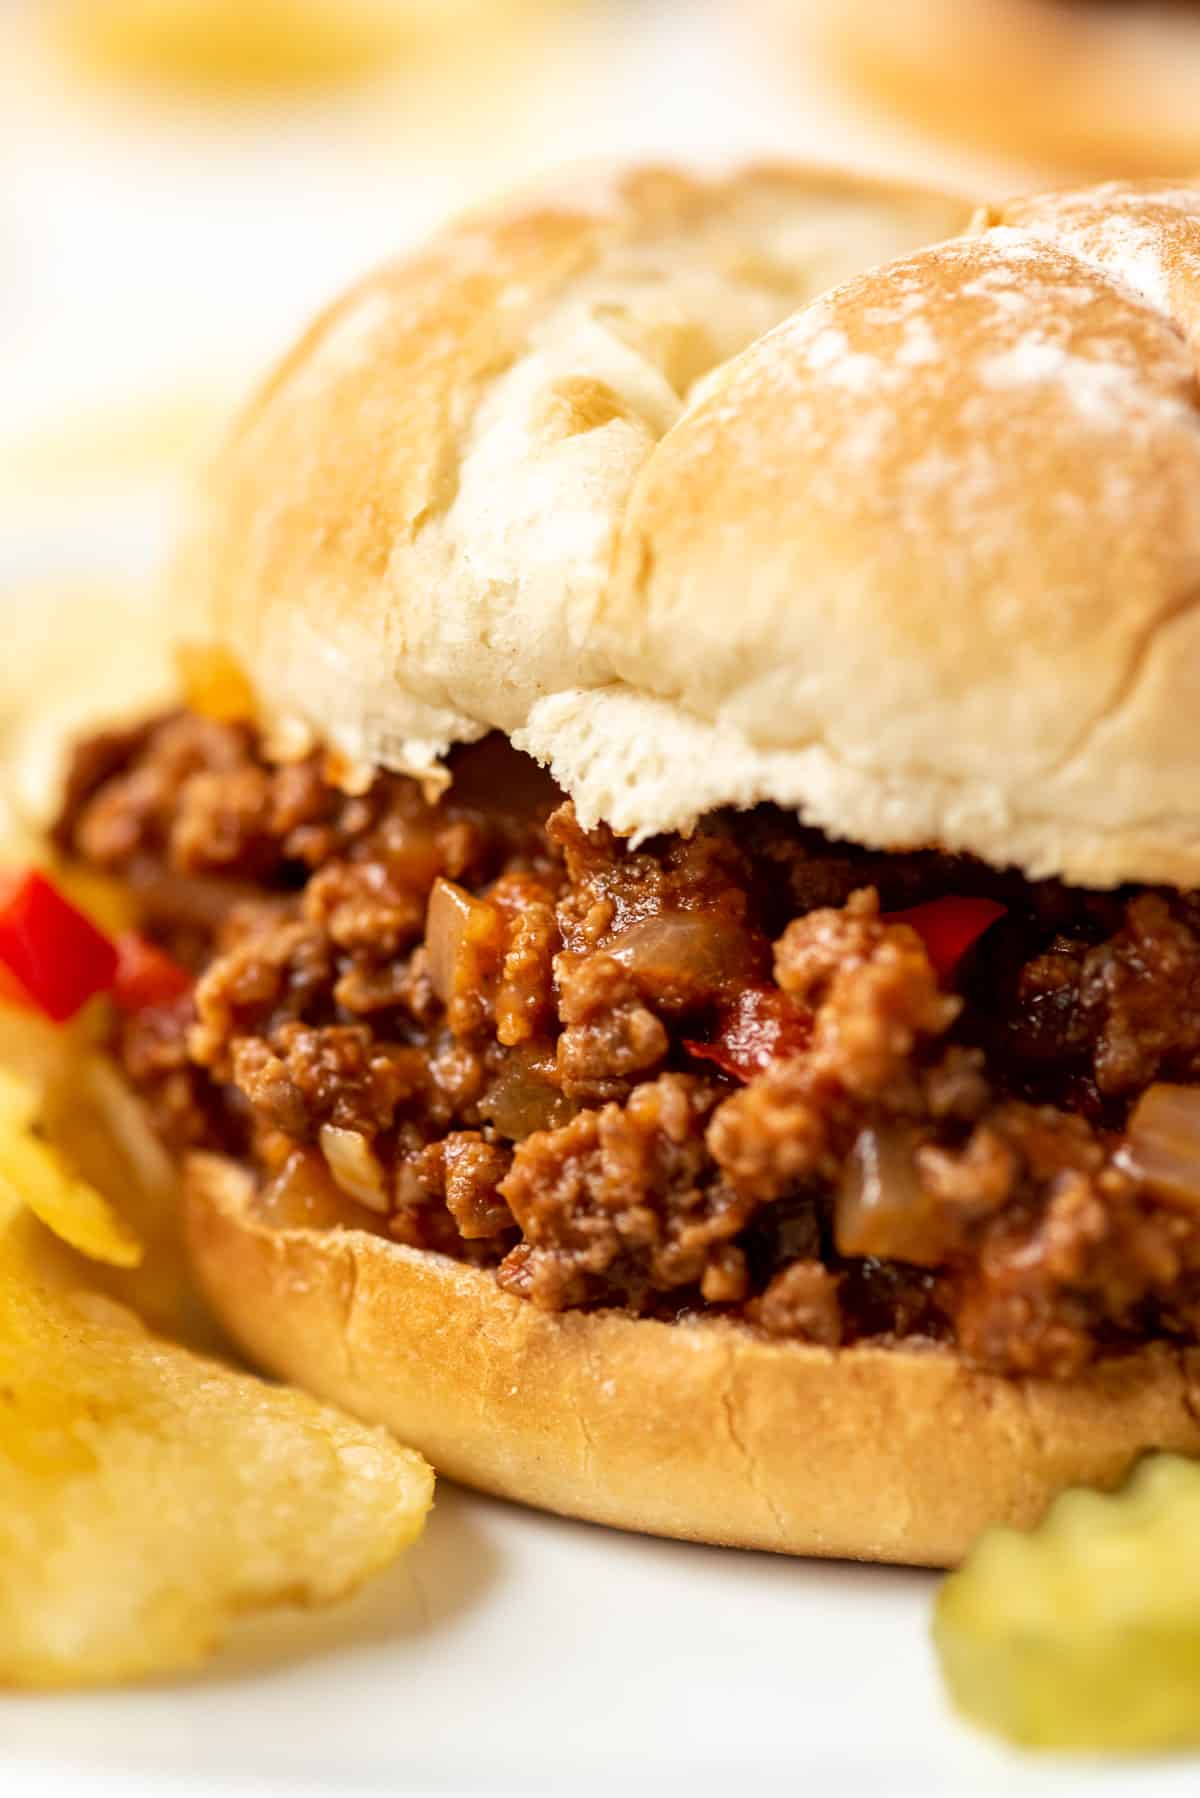 A soft hamburger bun with loose meat in sloppy joe sauce for a quick and easy dinner sandwich.